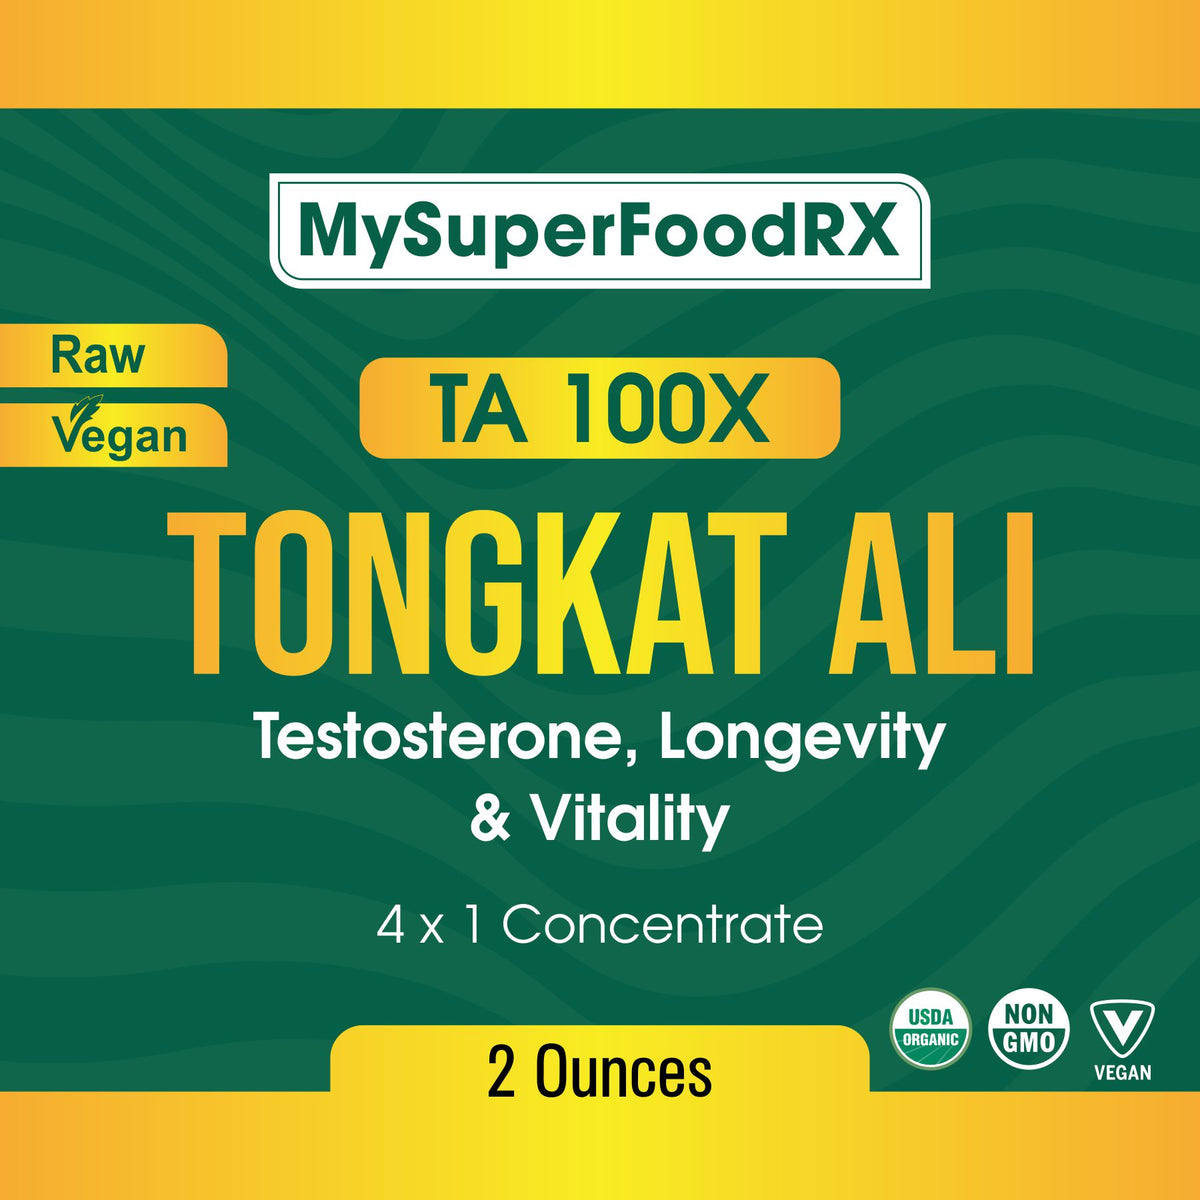 the label for my superfood rx